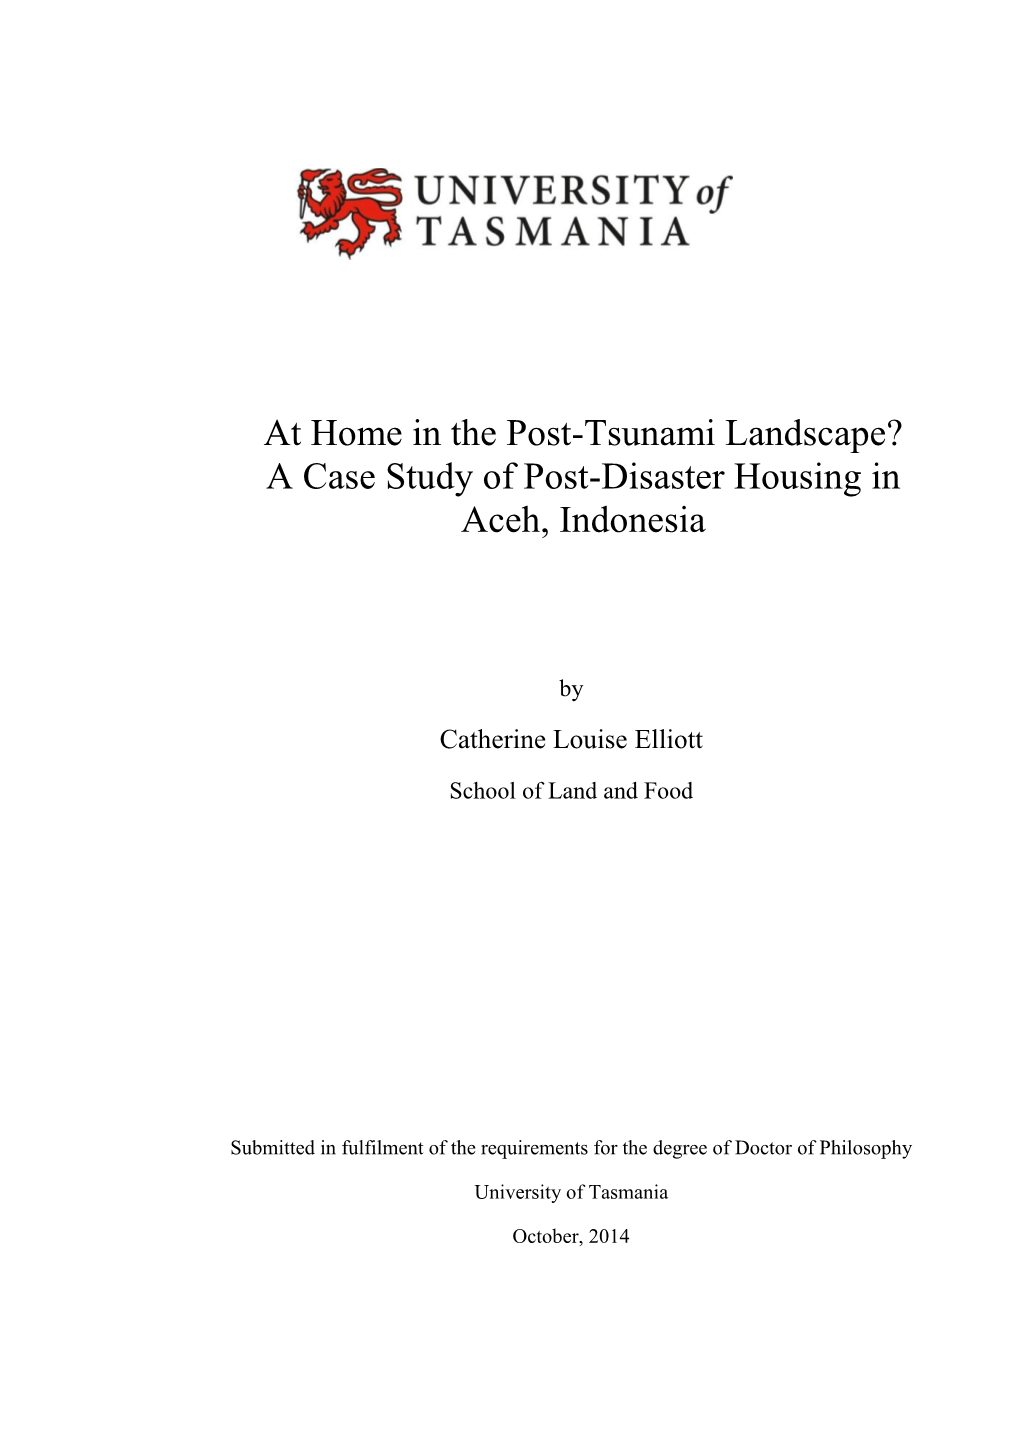 A Case Study of Post-Disaster Housing in Aceh, Indonesia